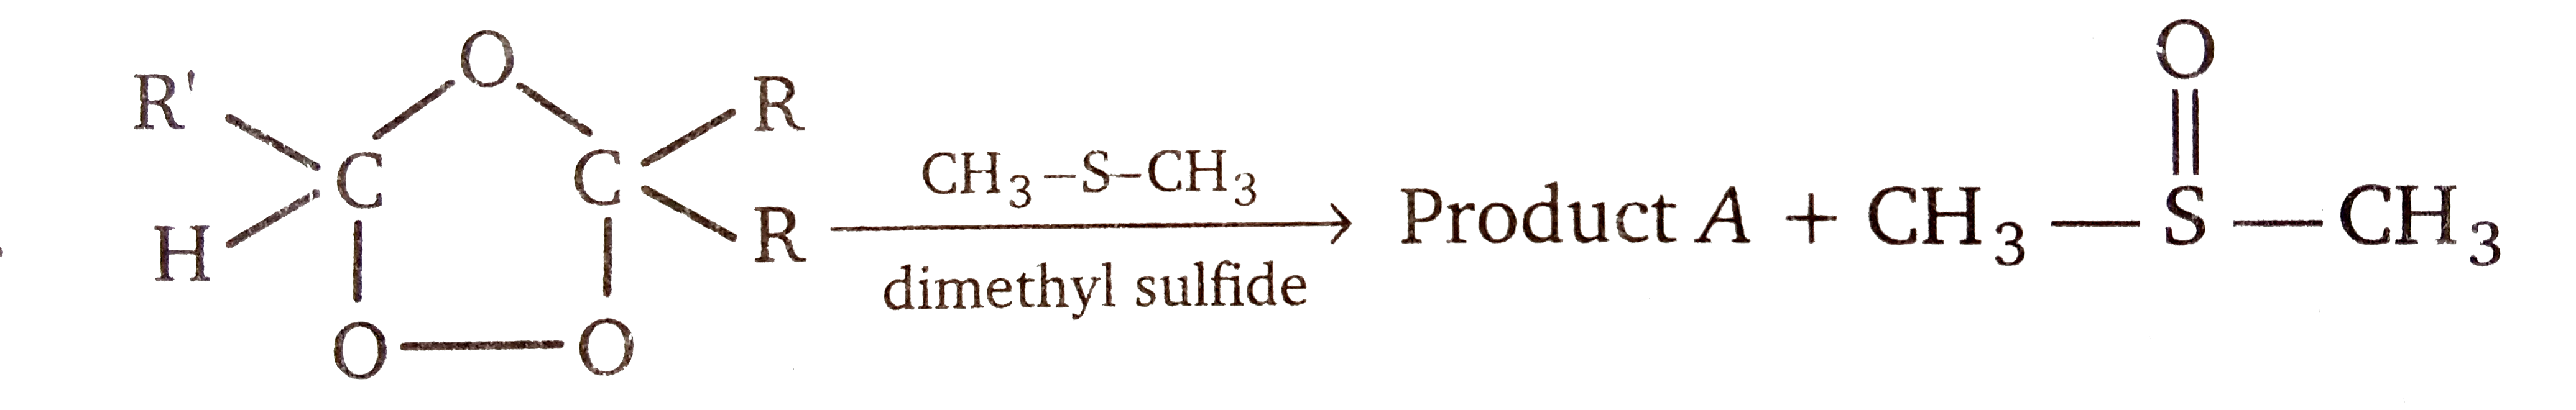 Product A of the above reaction is: